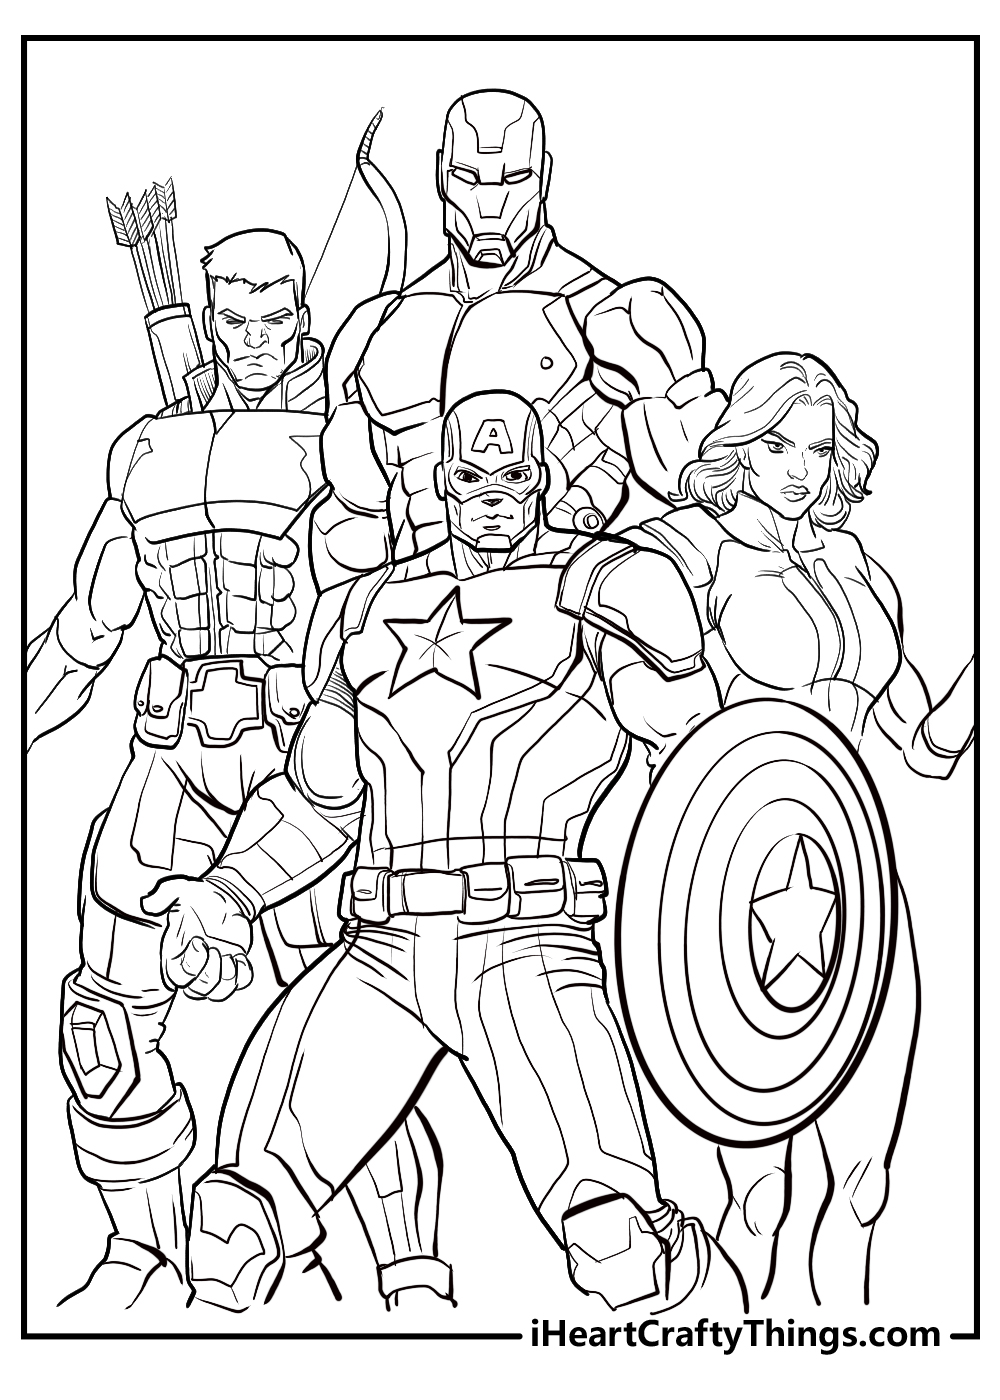 Avengers Superheroes Drawing Hulk In 2 Minutes Step by Step Easy Art -  YouTube-saigonsouth.com.vn